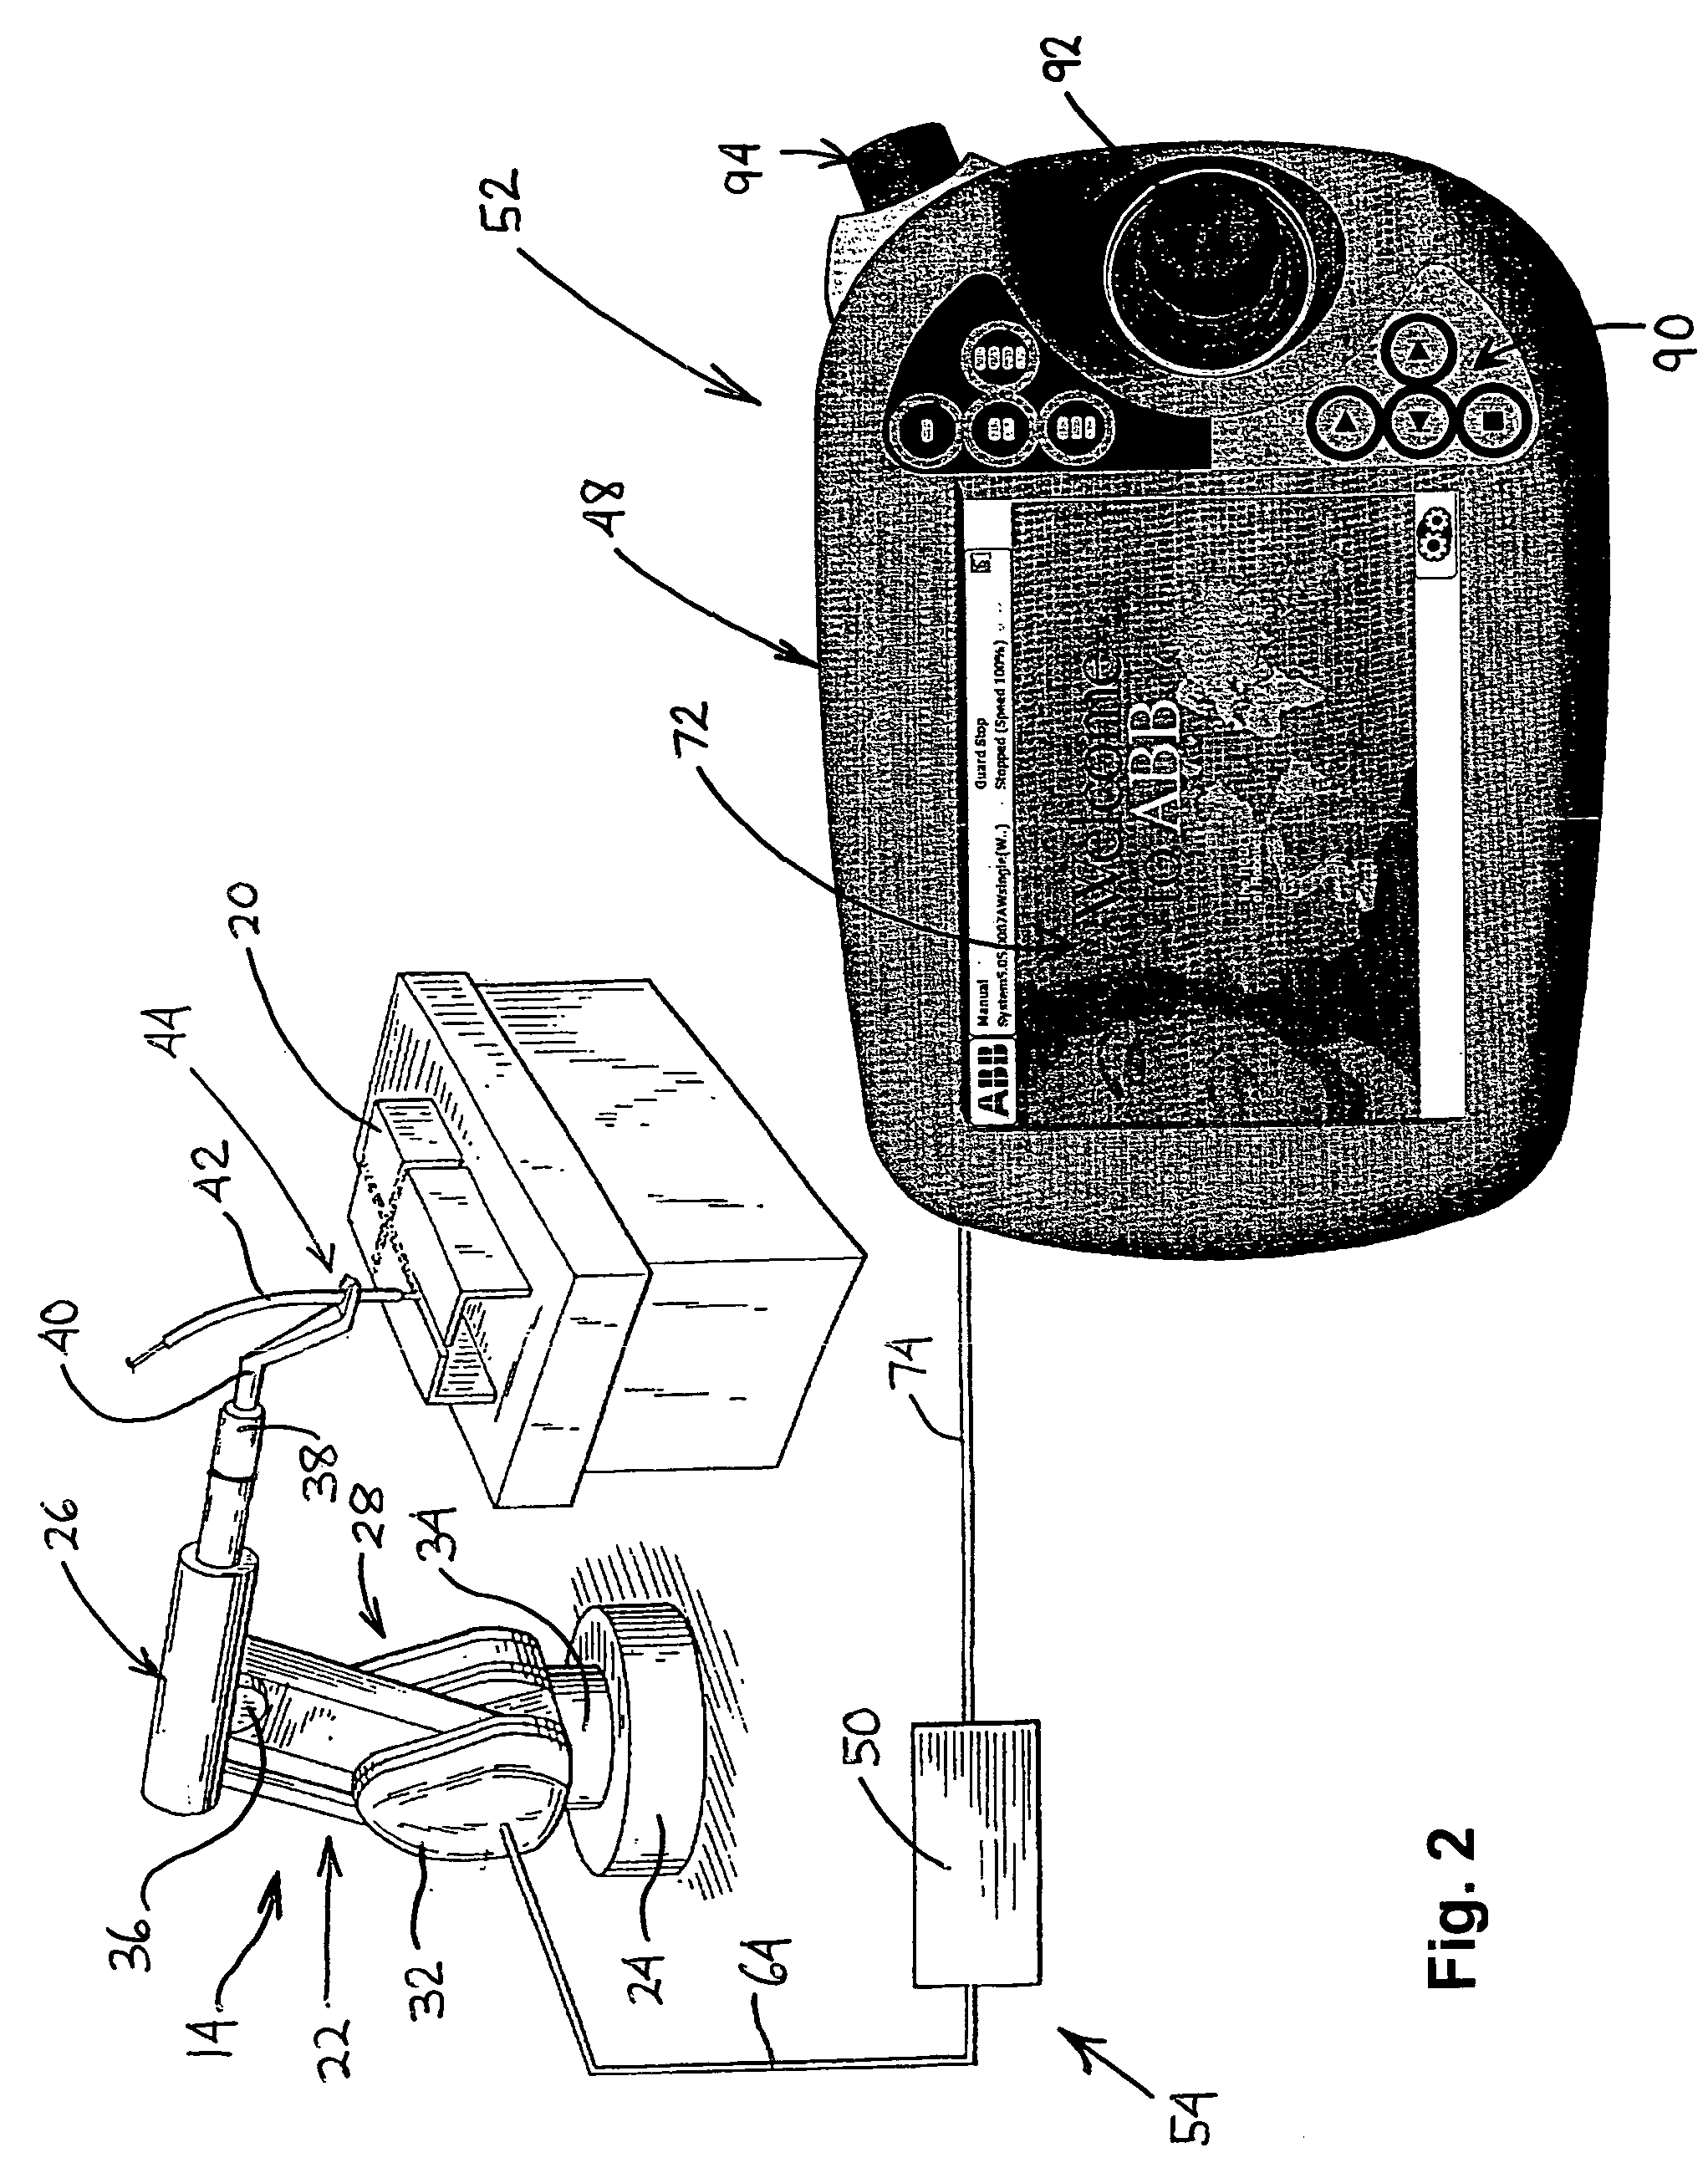 Method and apparatus for developing a metadata-infused software program for controlling a robot